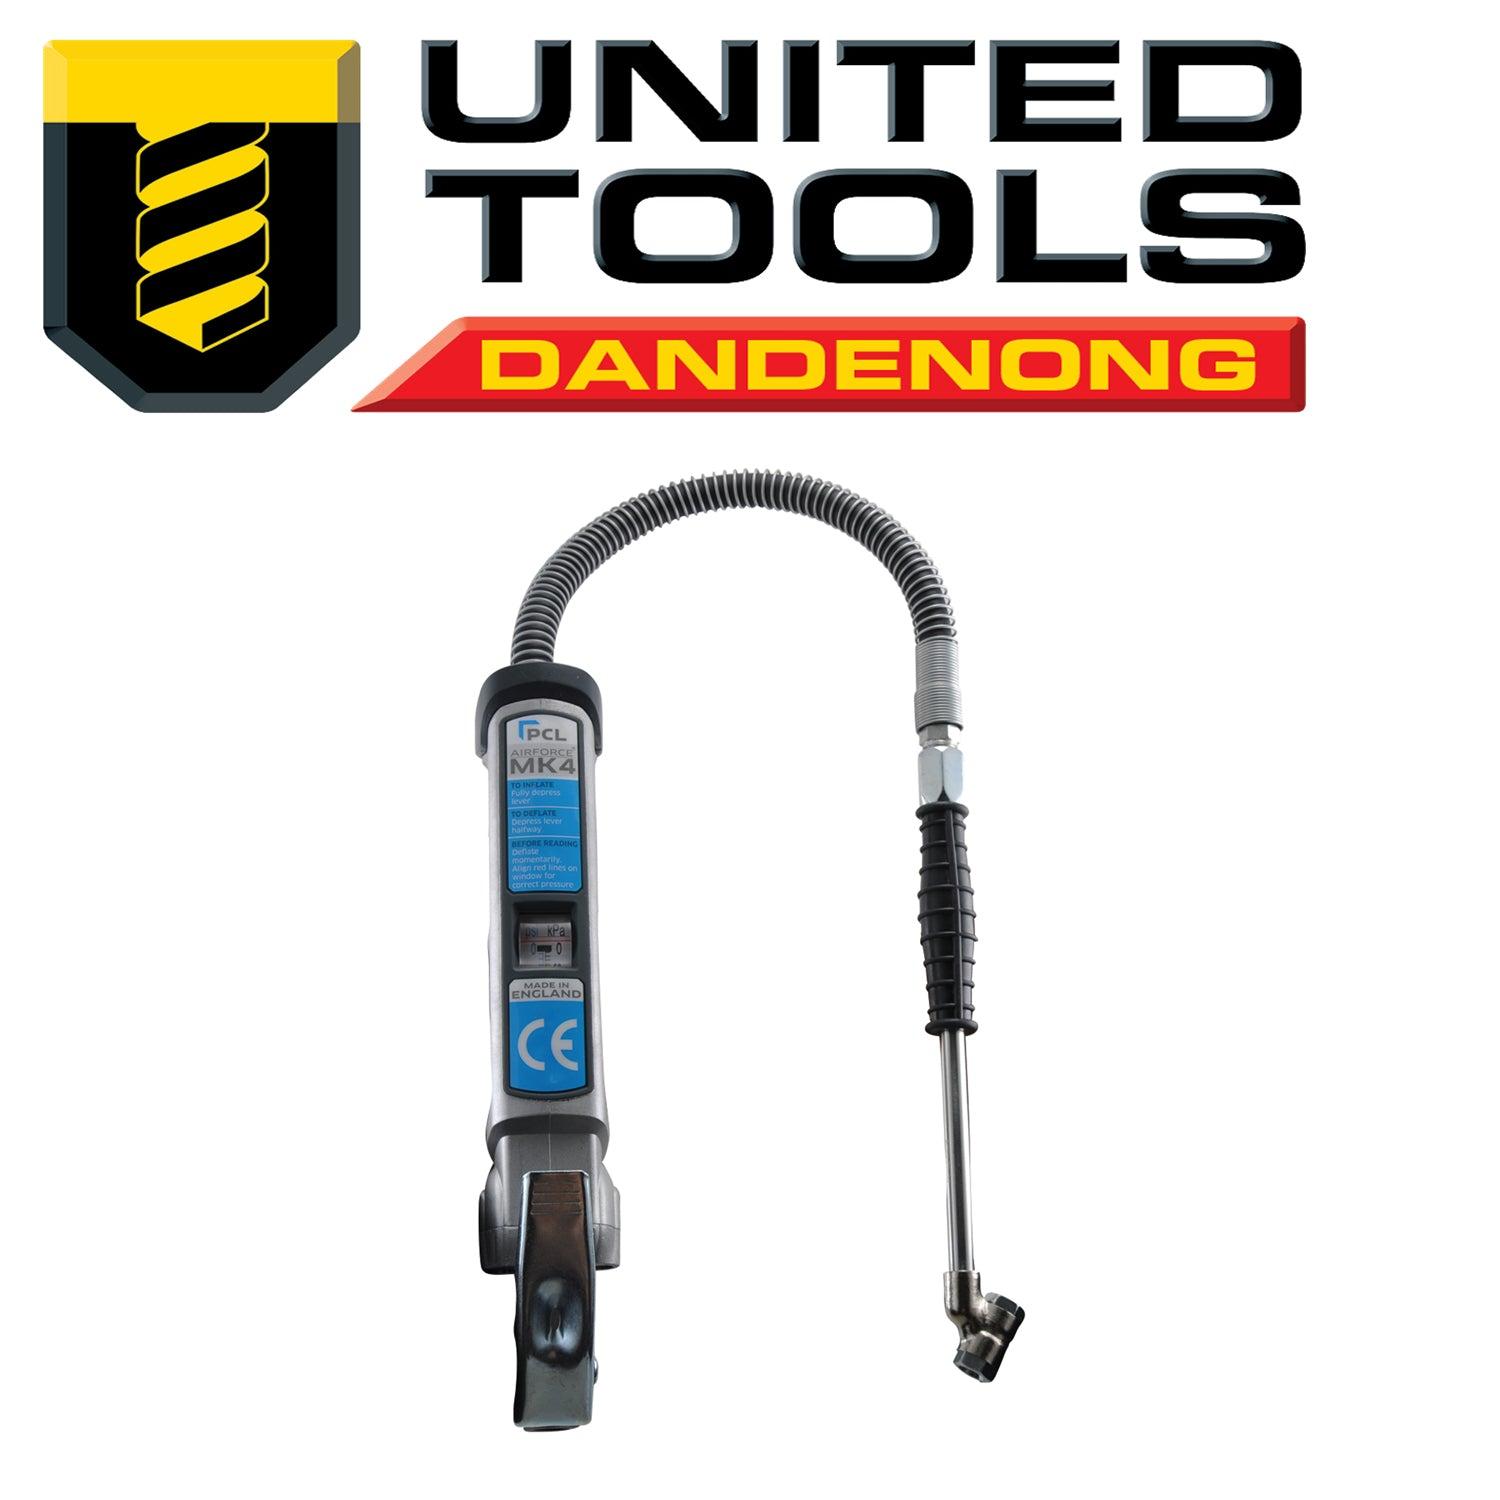 Product 
			PCL DRIVEWAY TYRE INFLATOR ANALOGUE | 0 - 138 PSI 124MK4 inc Free Deli

			
				– United Tools Dandenong South
			
		 image